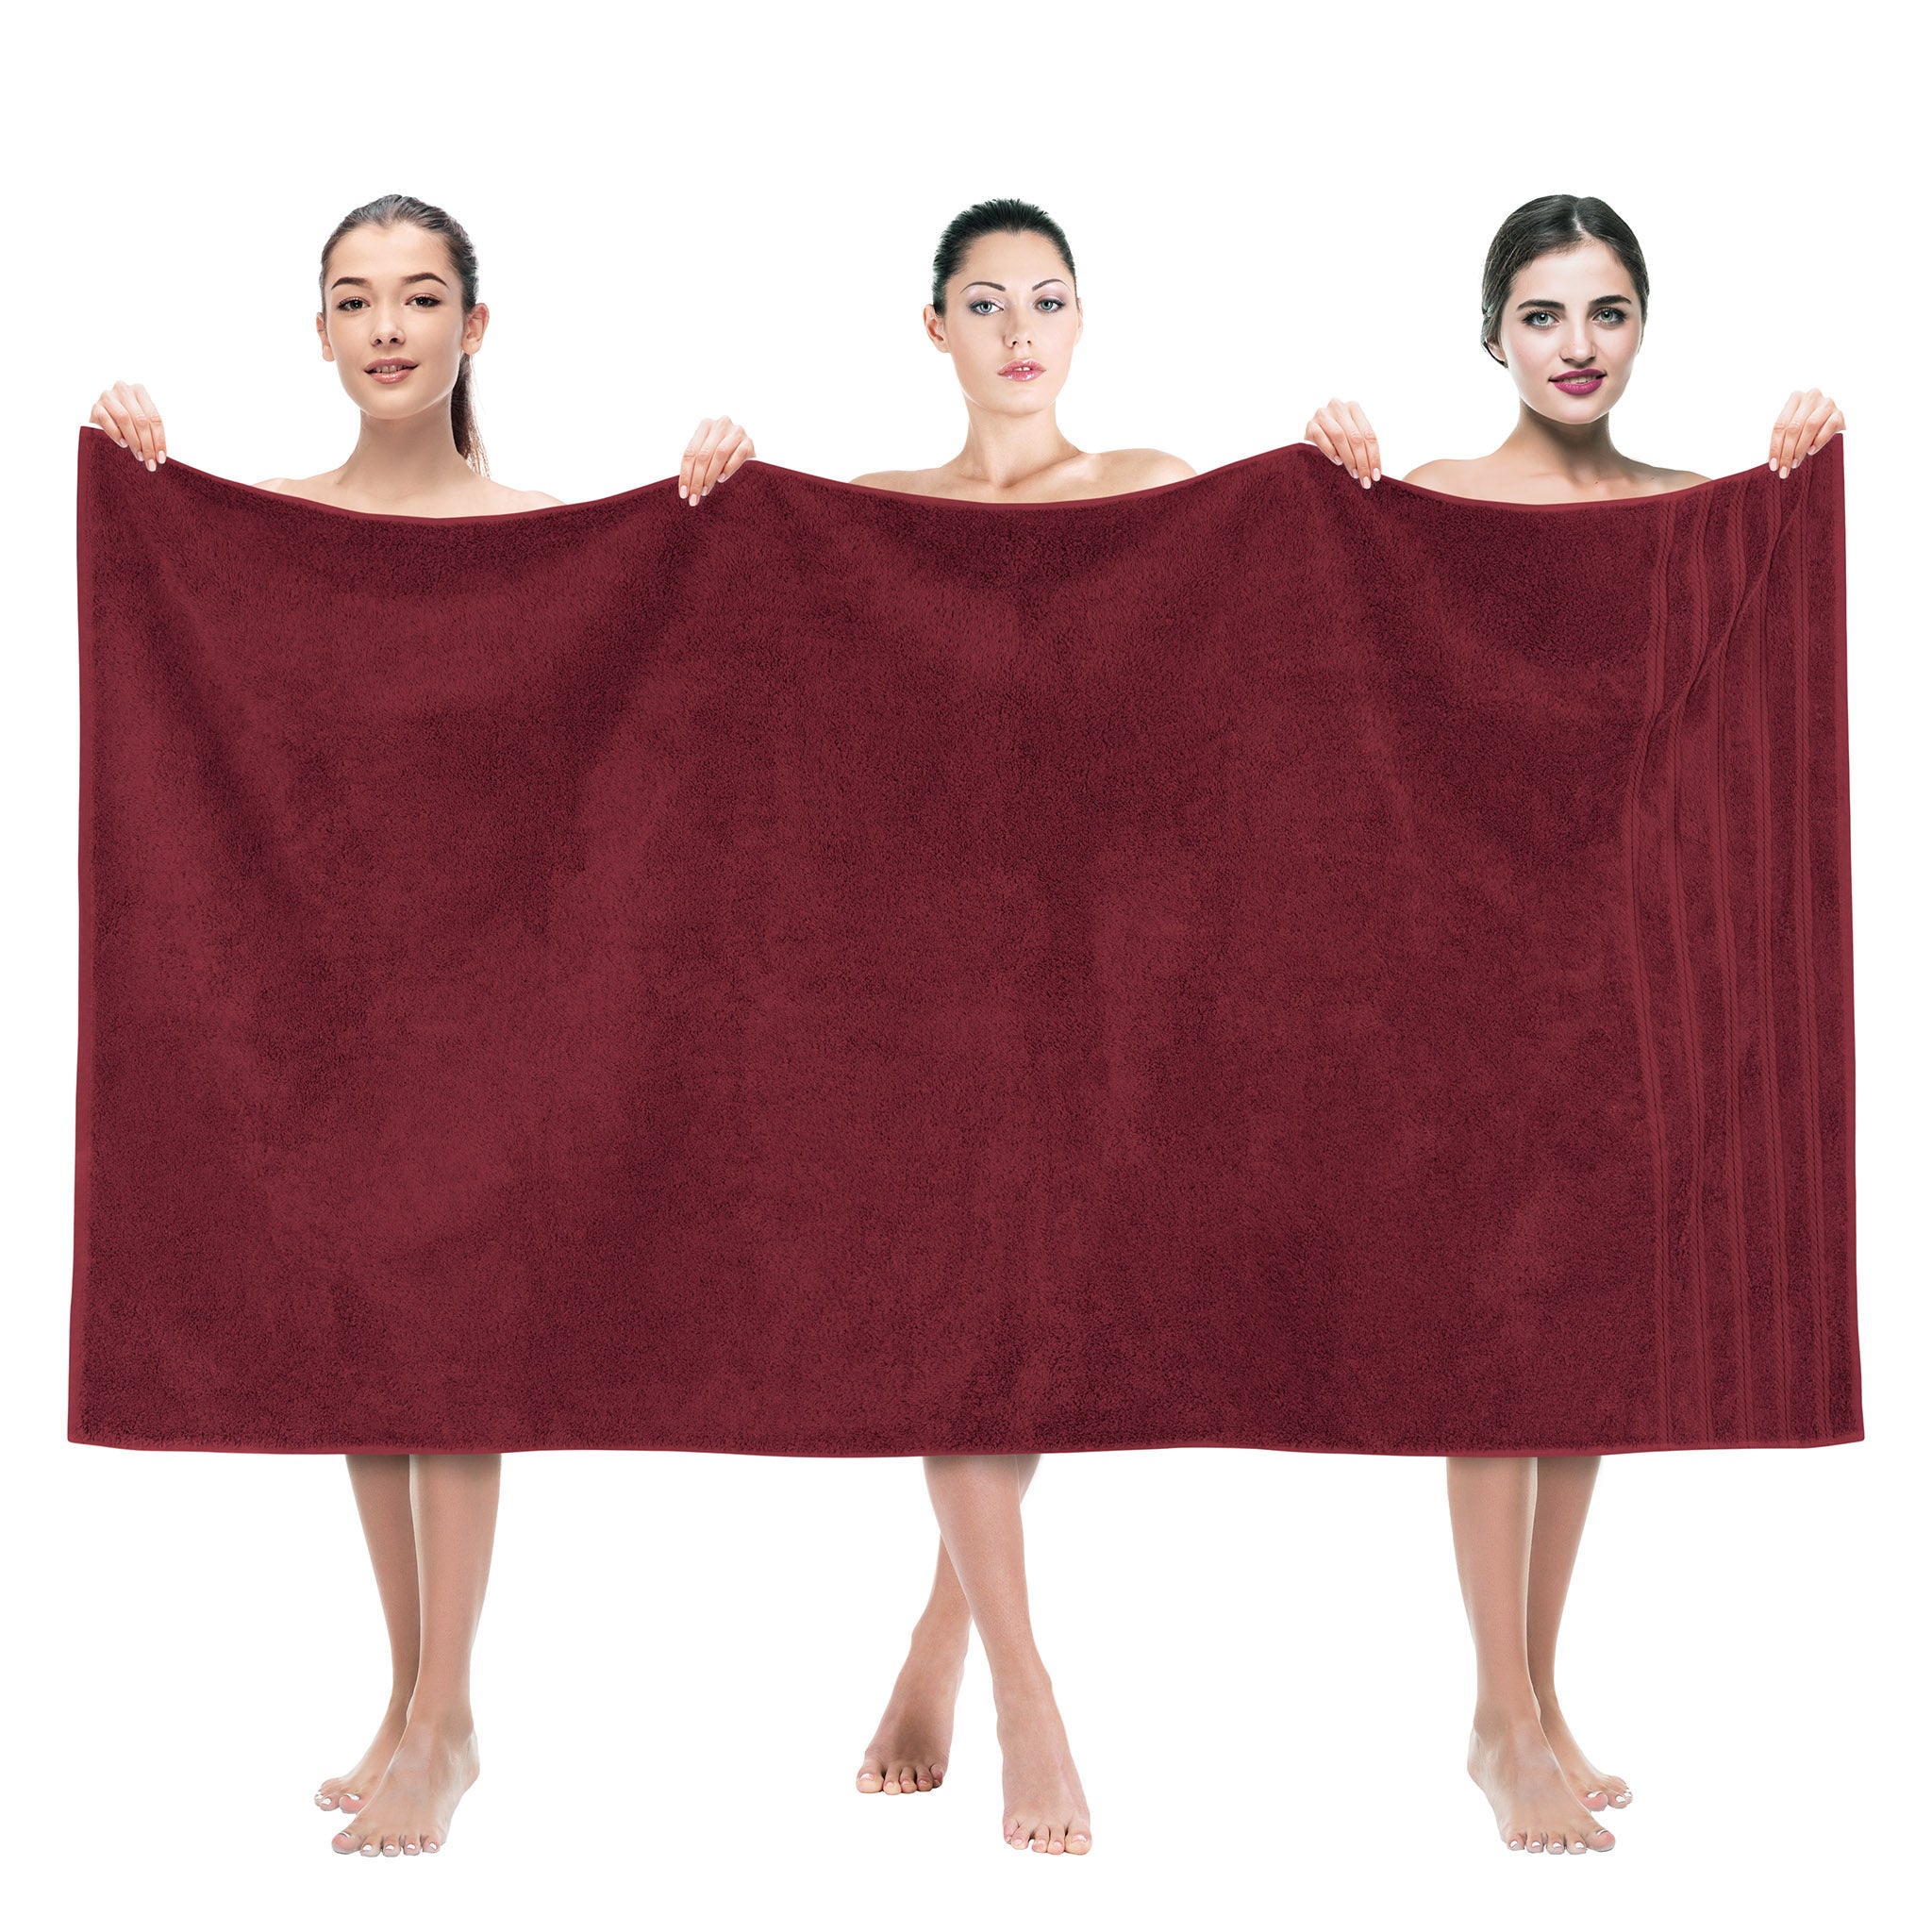 Smuge 4 Pack Oversized Bath Sheet Towels (35 x 70 in,Red) 700 GSM